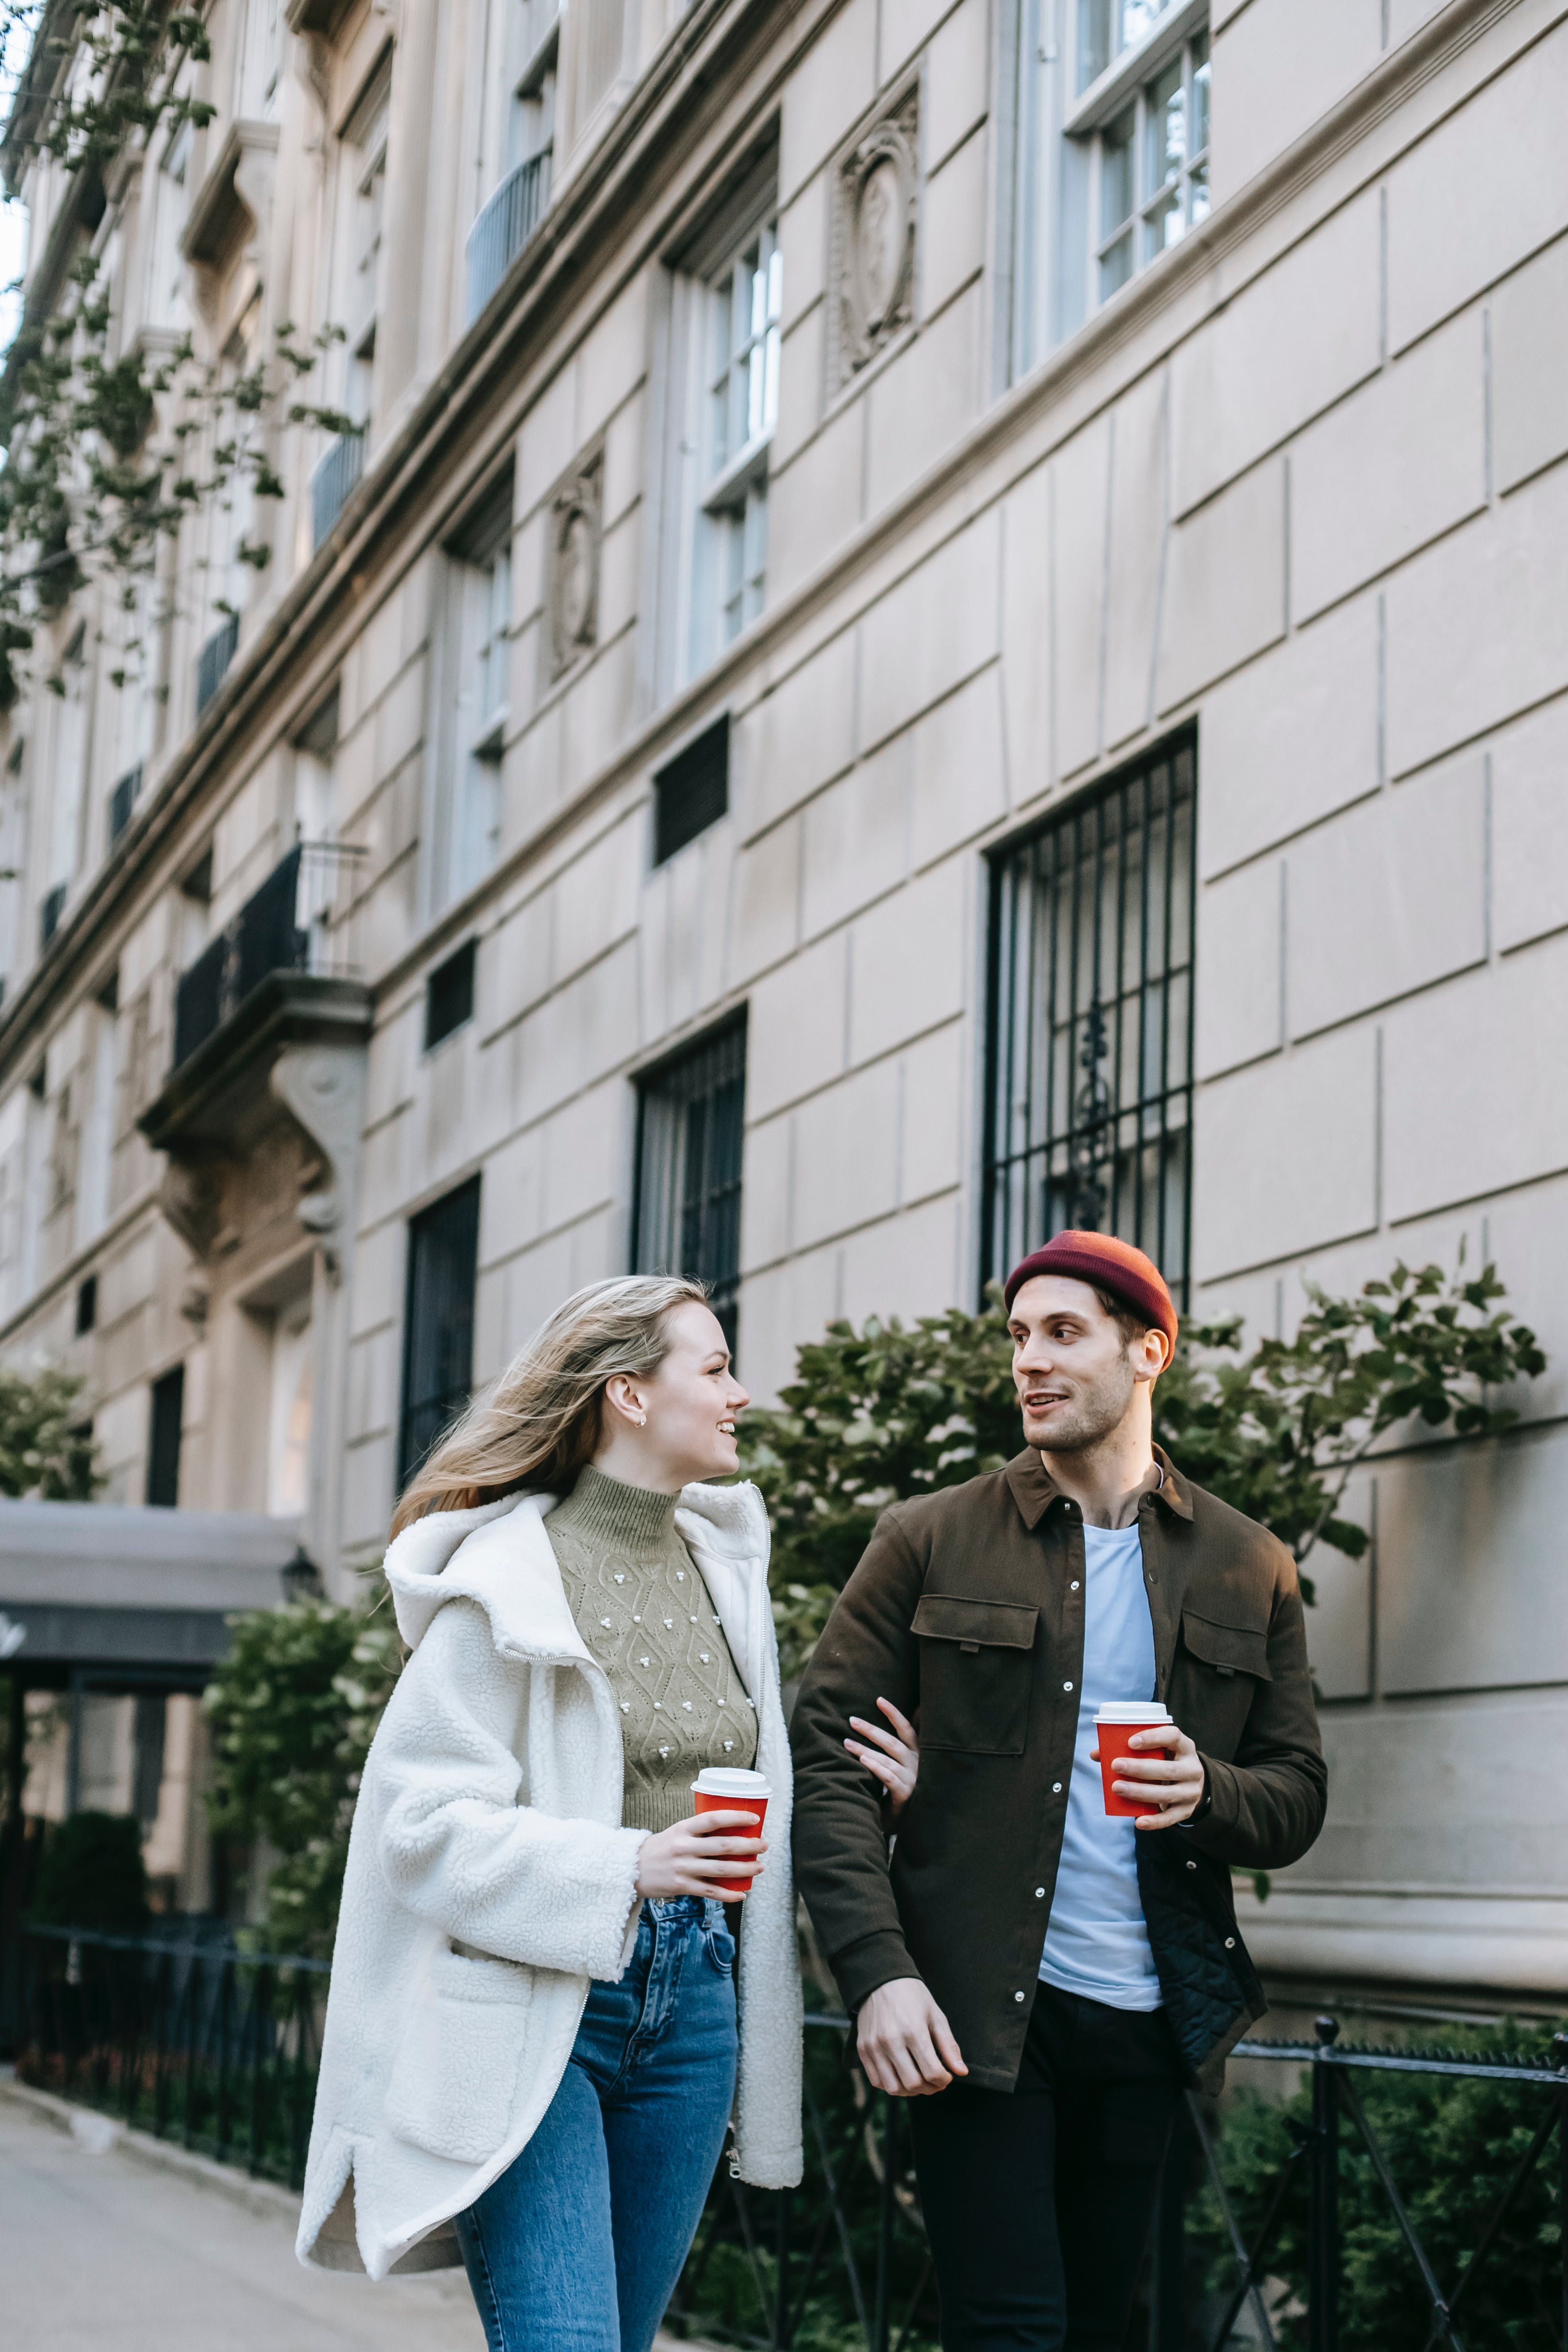 A man and woman talking | Source: Pexels